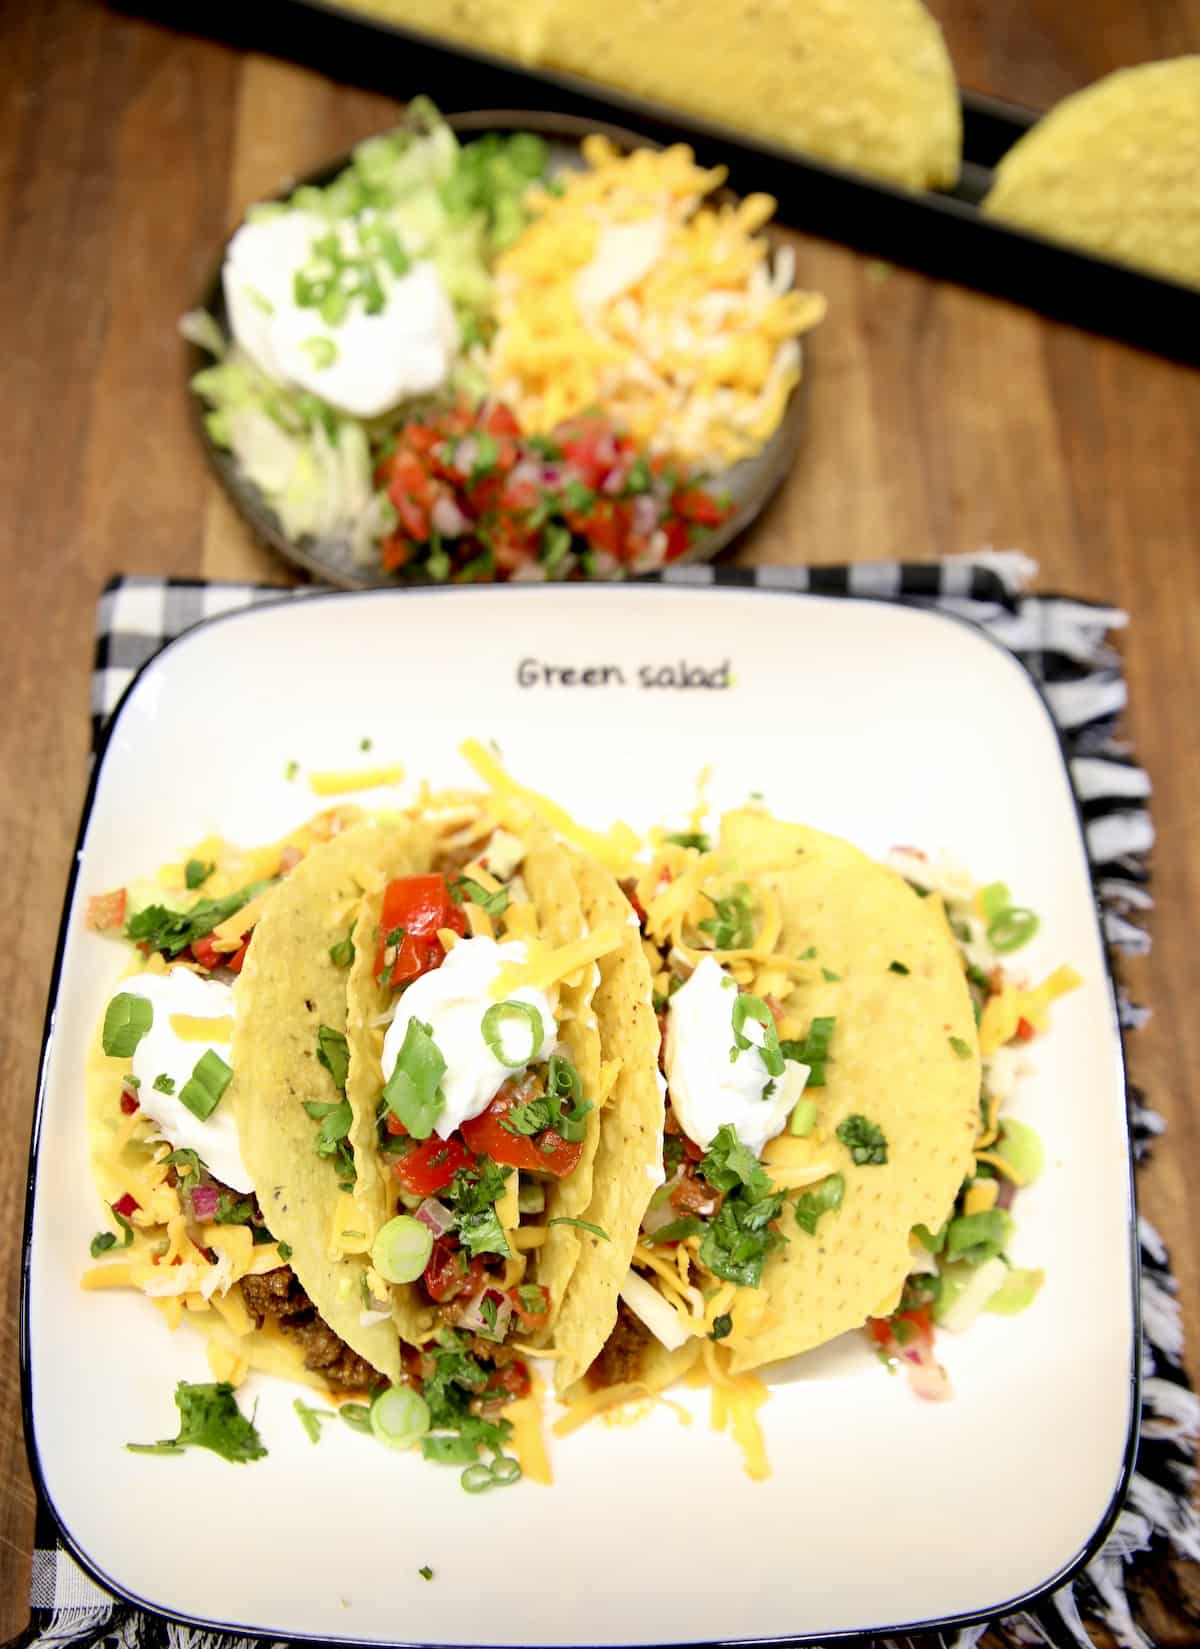 Ground beef tacos with sour cream, salsa.